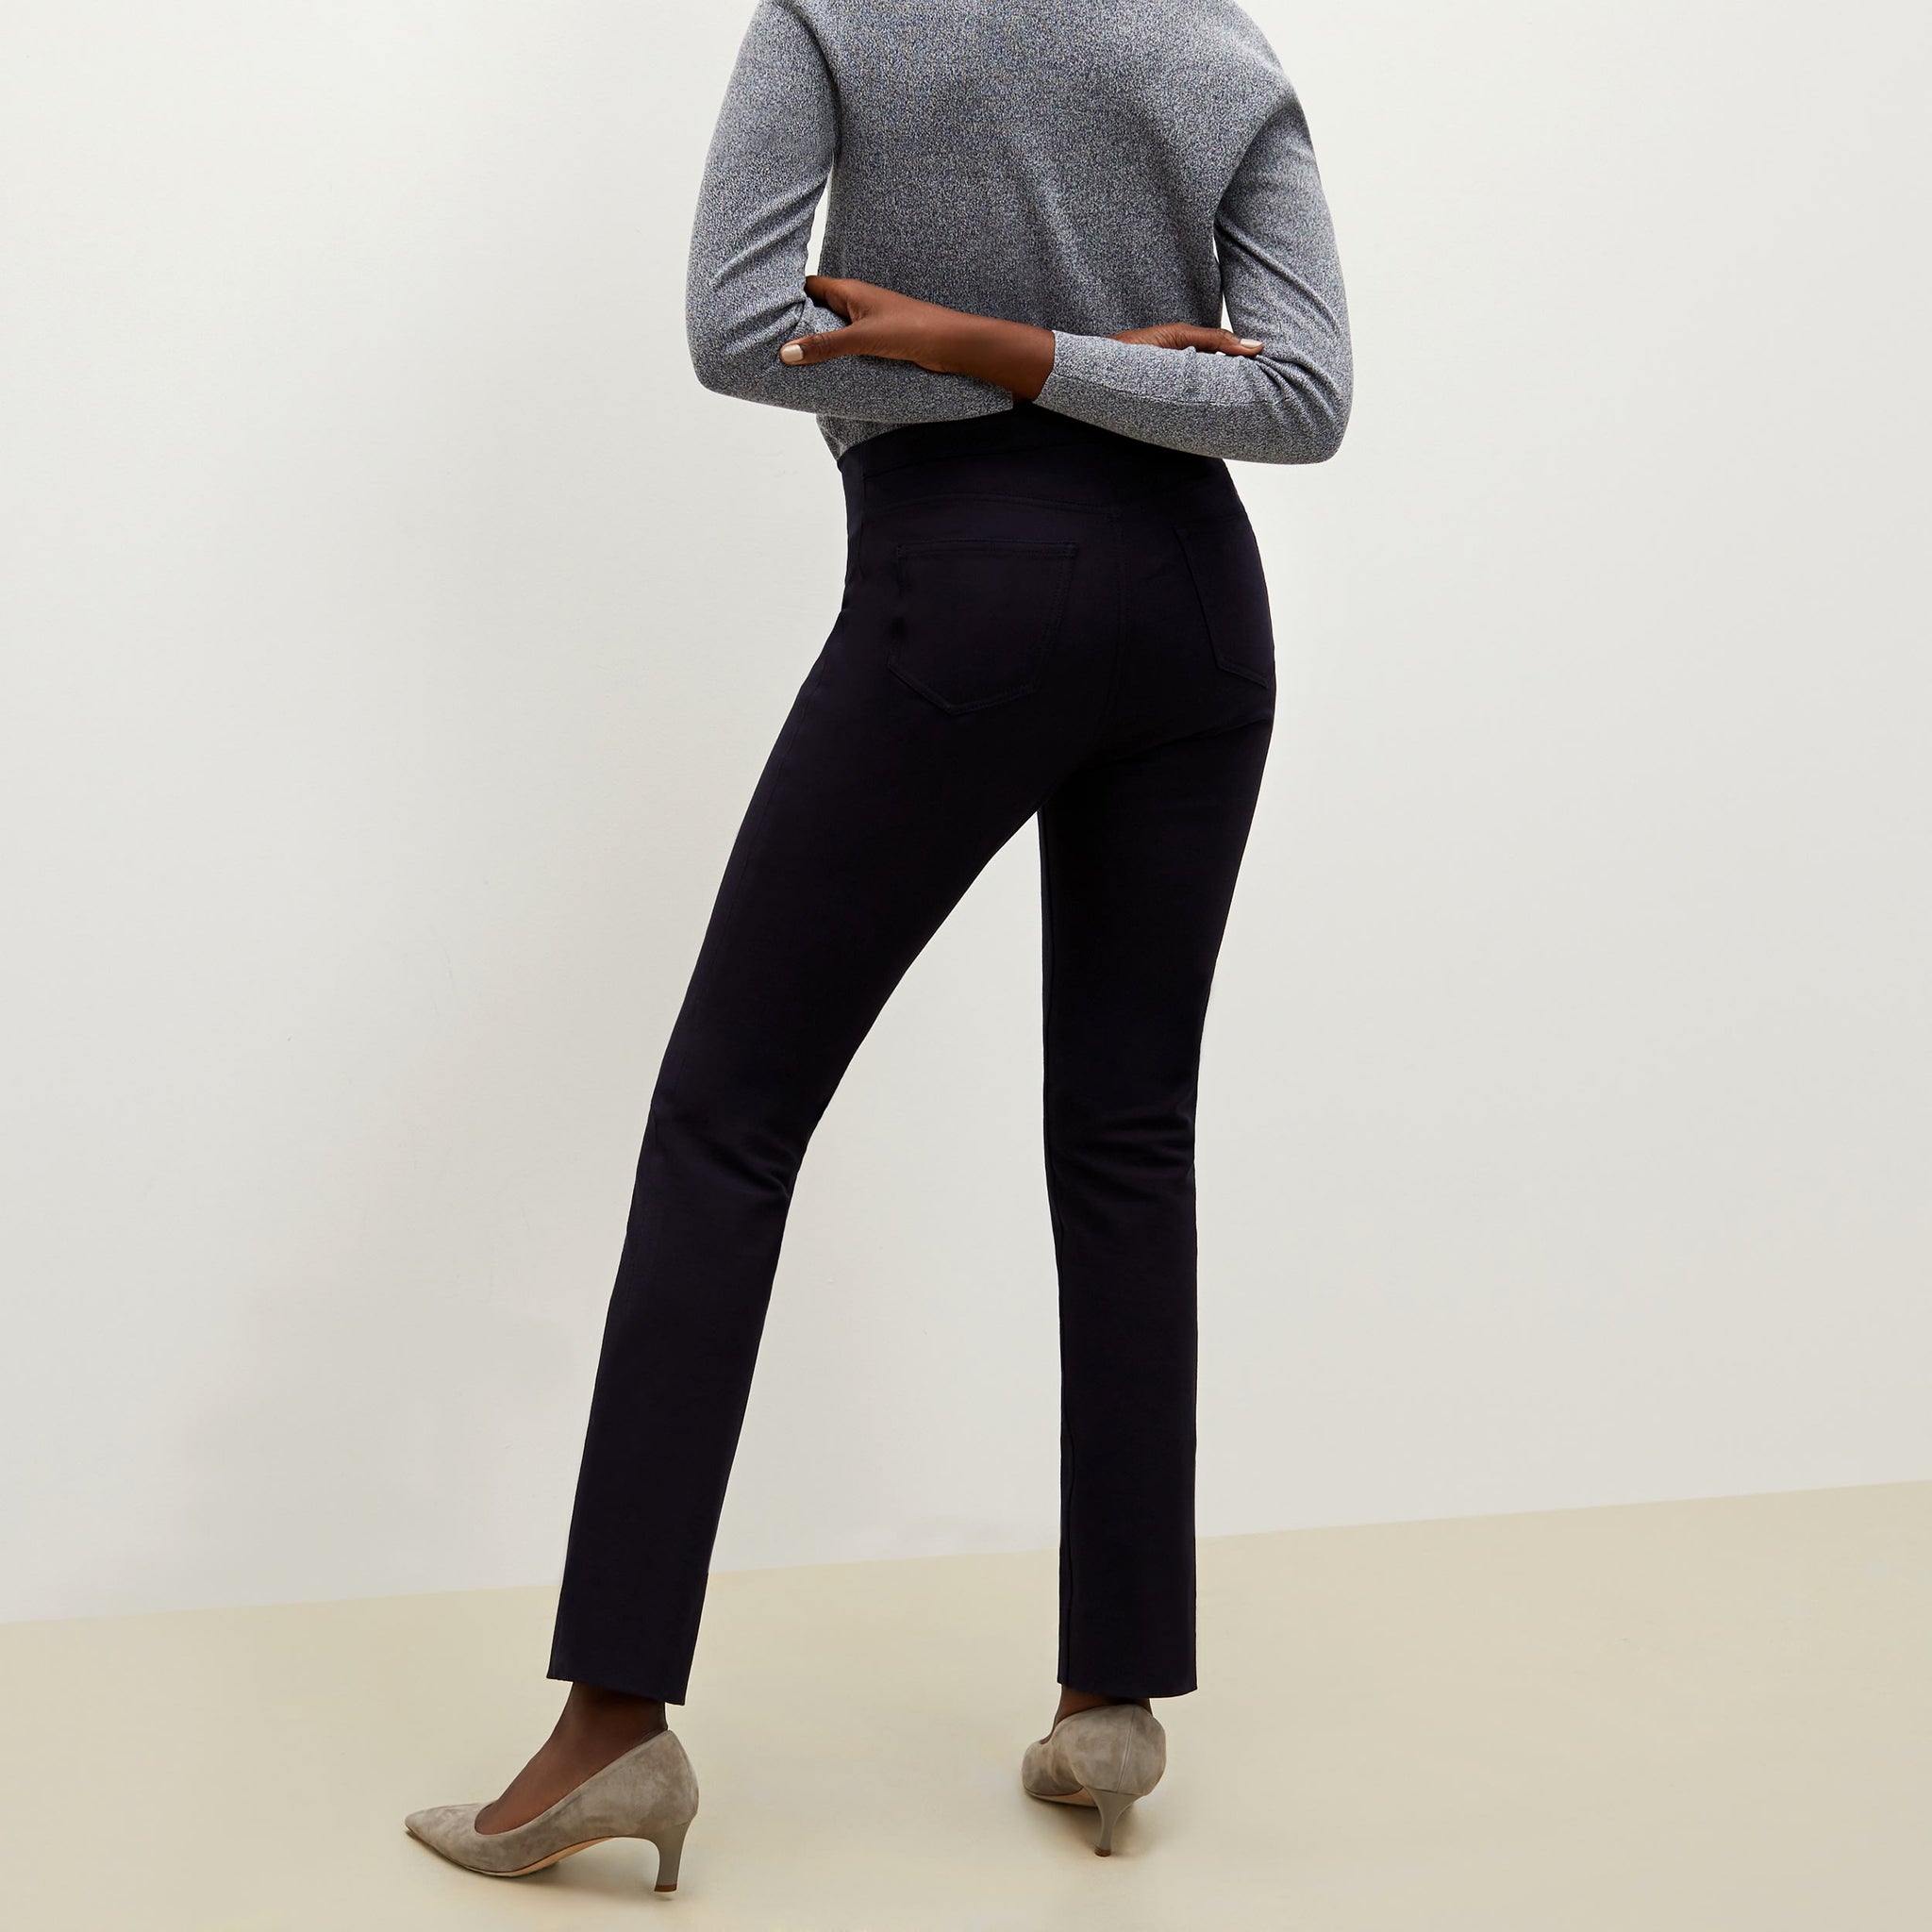 Back image of a woman standing wearing the Hockley pant in ink